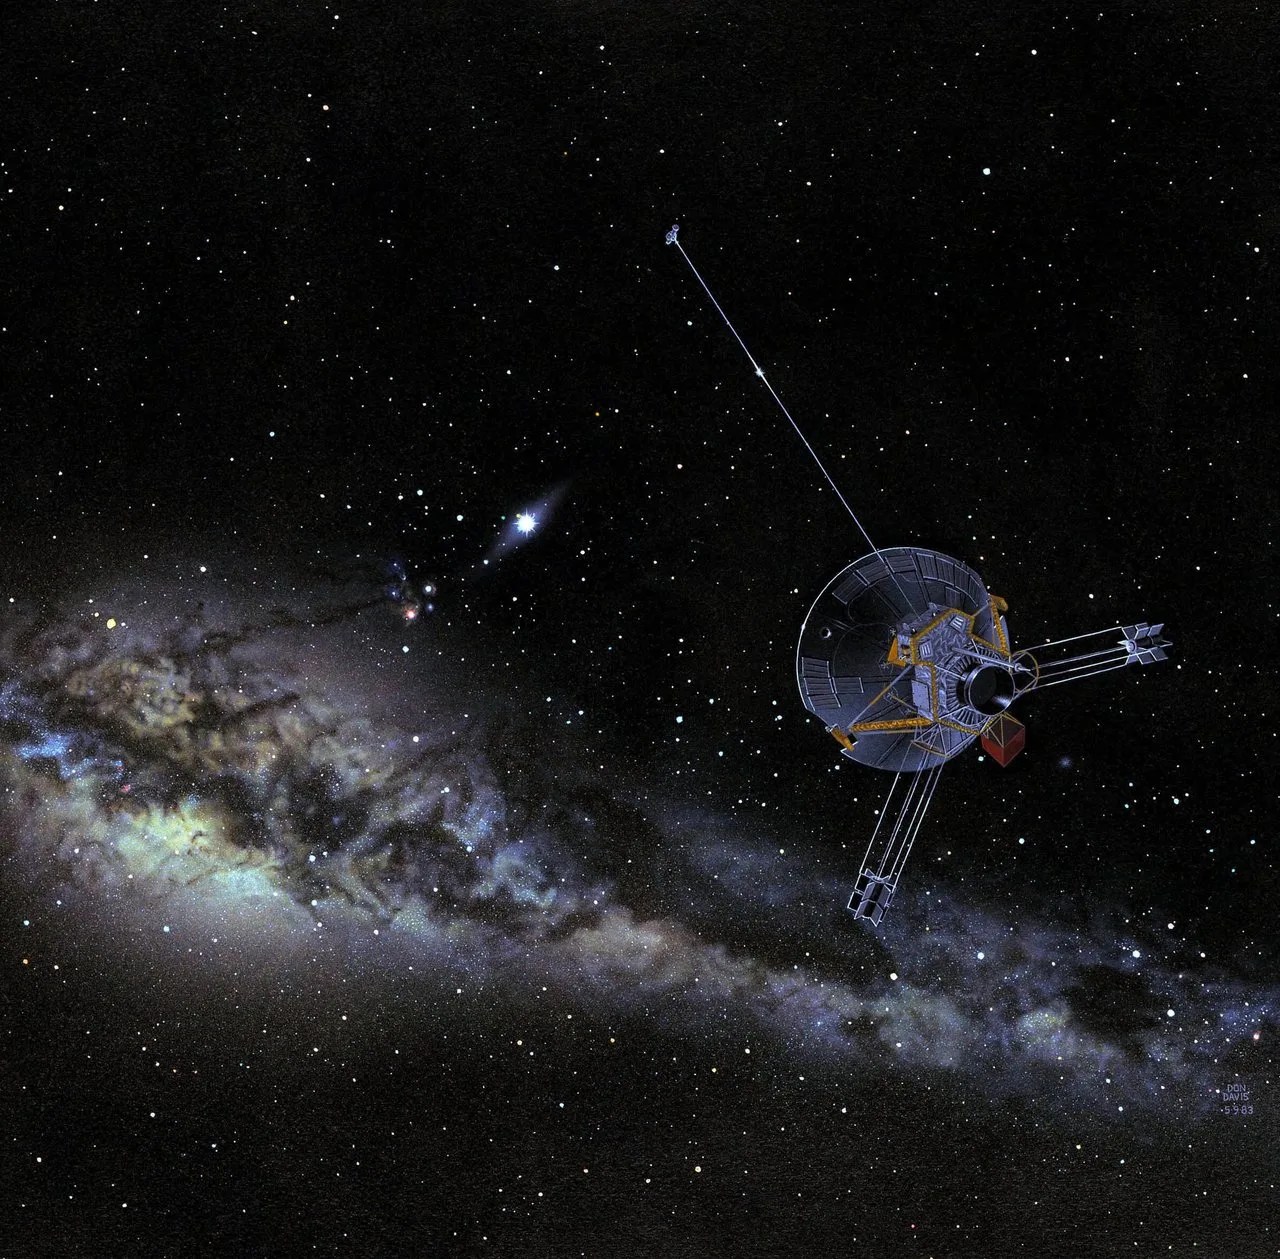 Spacecraft with Milky Way in background.